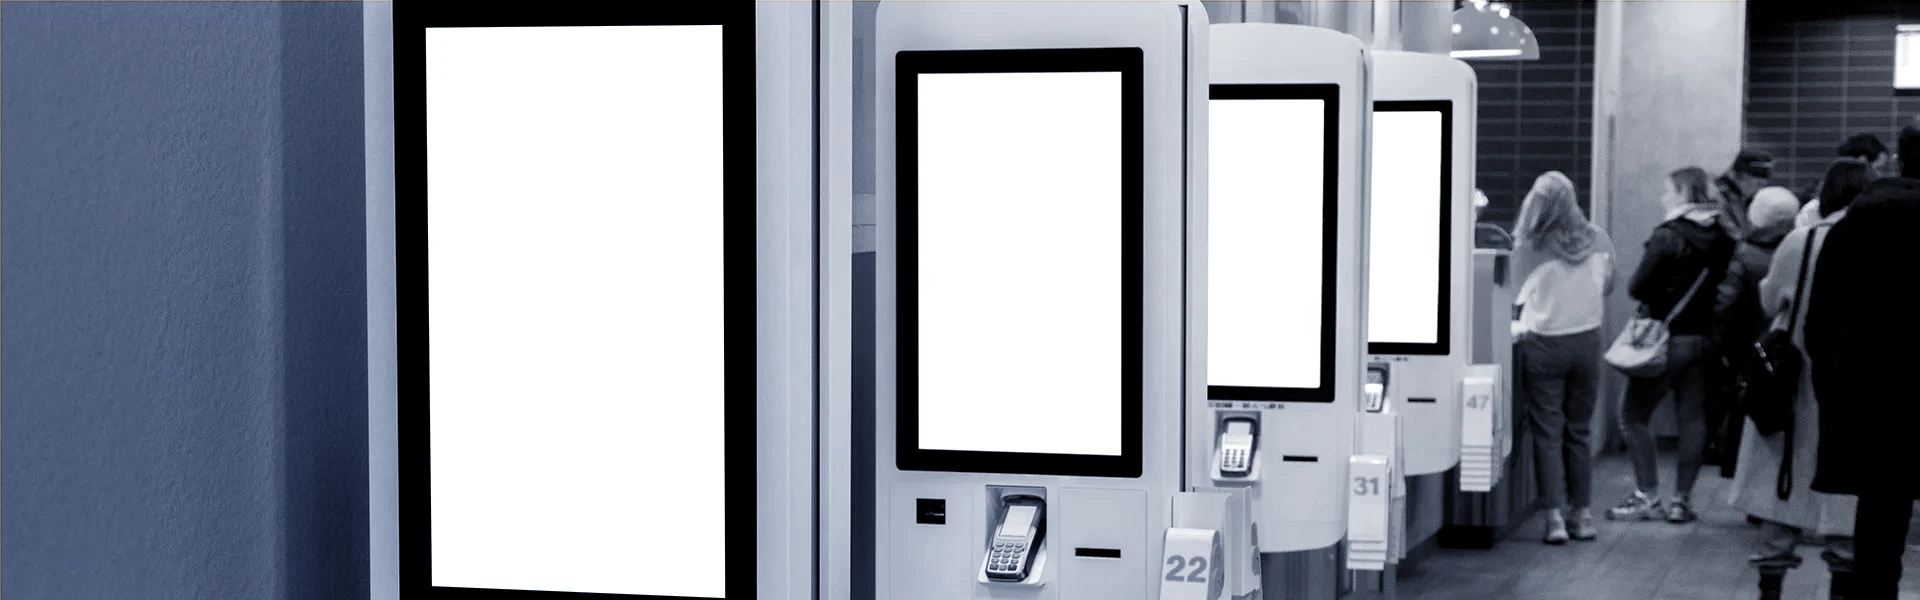 Solutions by Device - Kiosks